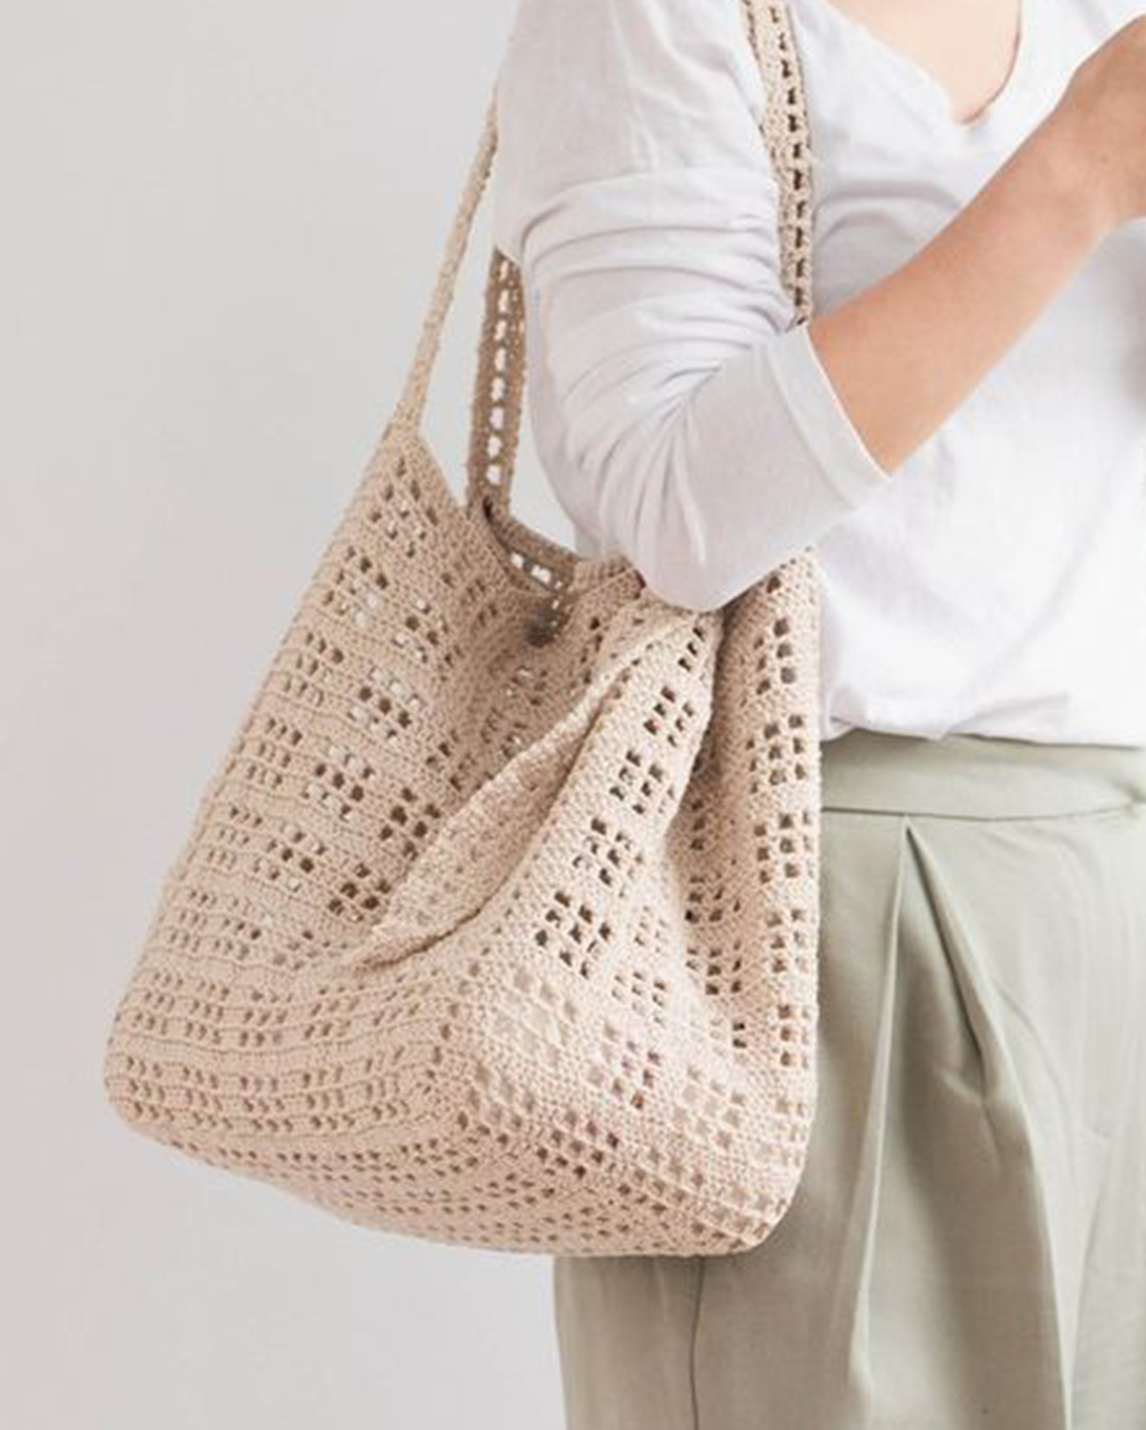 woven bag trend